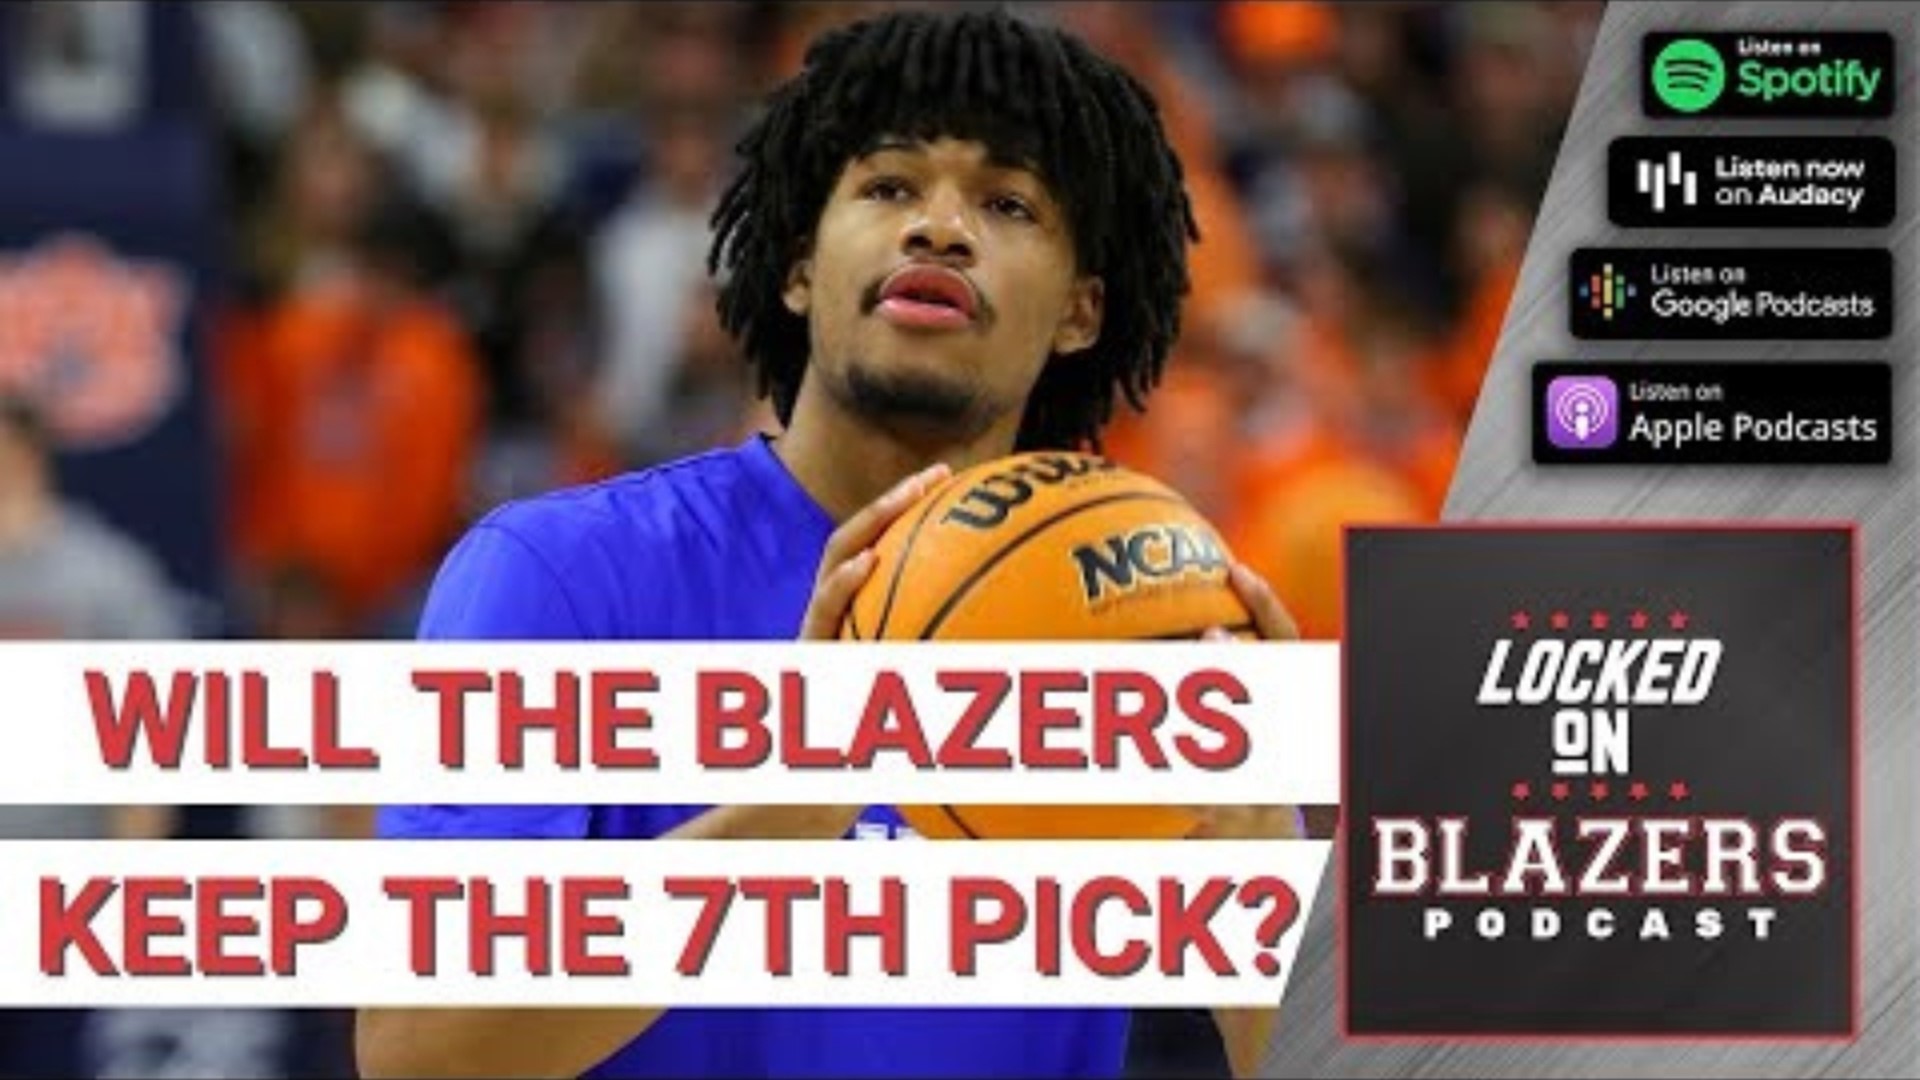 Are the Blazers really targeting Shaedon Sharpe with the seventh pick? Plus, what players might Portland draft in the second round with the 36th pick?